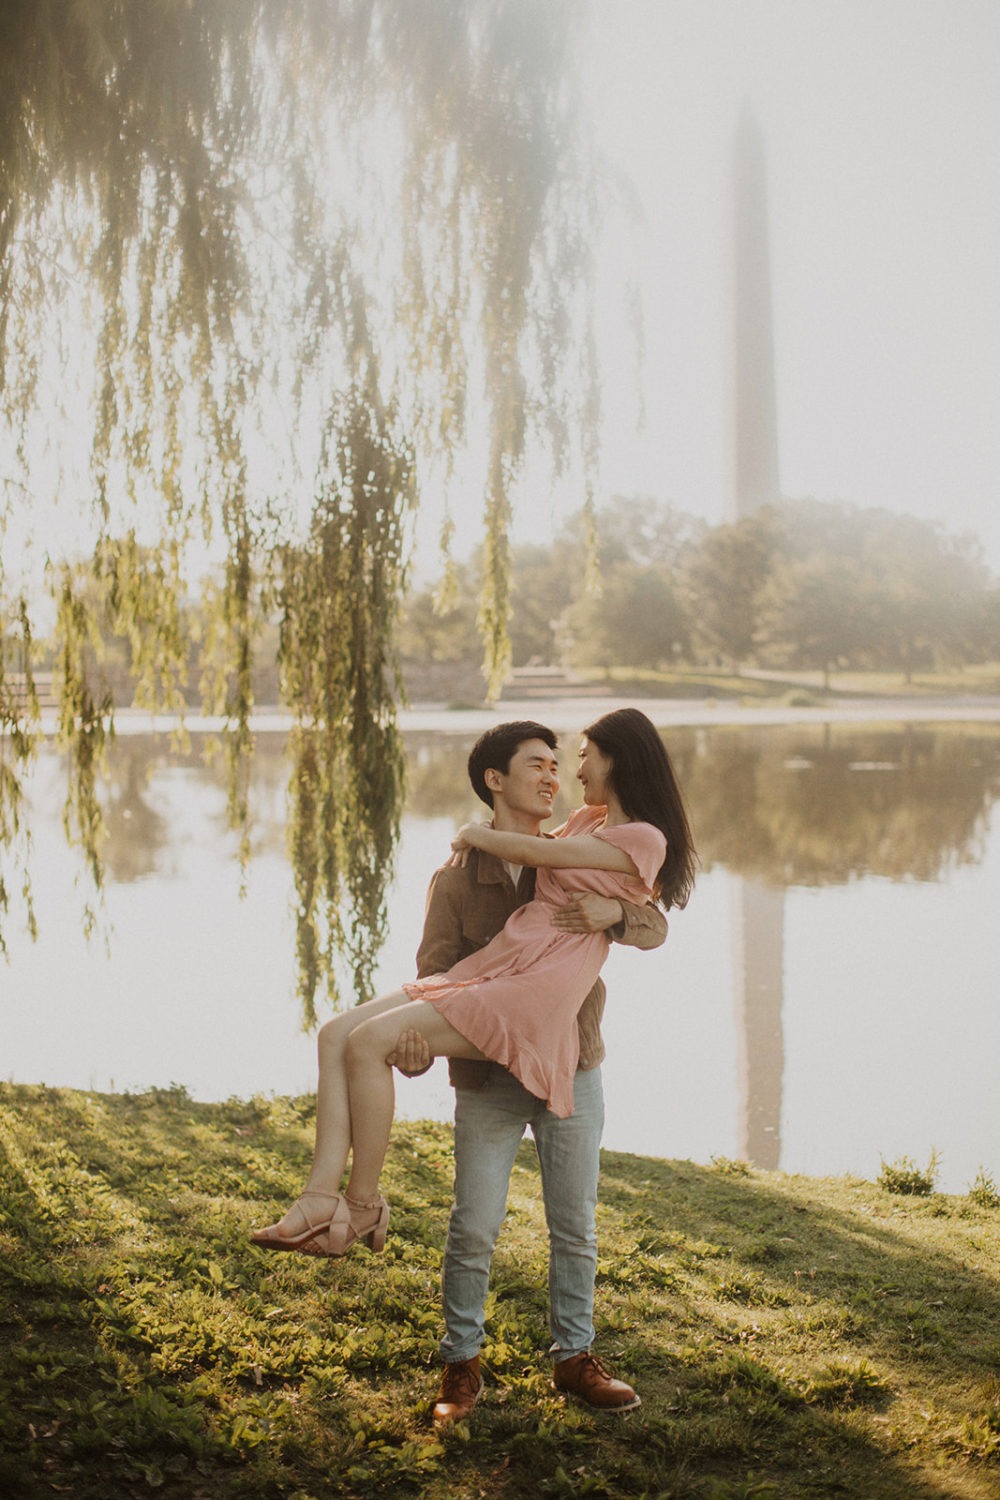 Man carries woman under tree by reflecting pool at sunrise engagement session